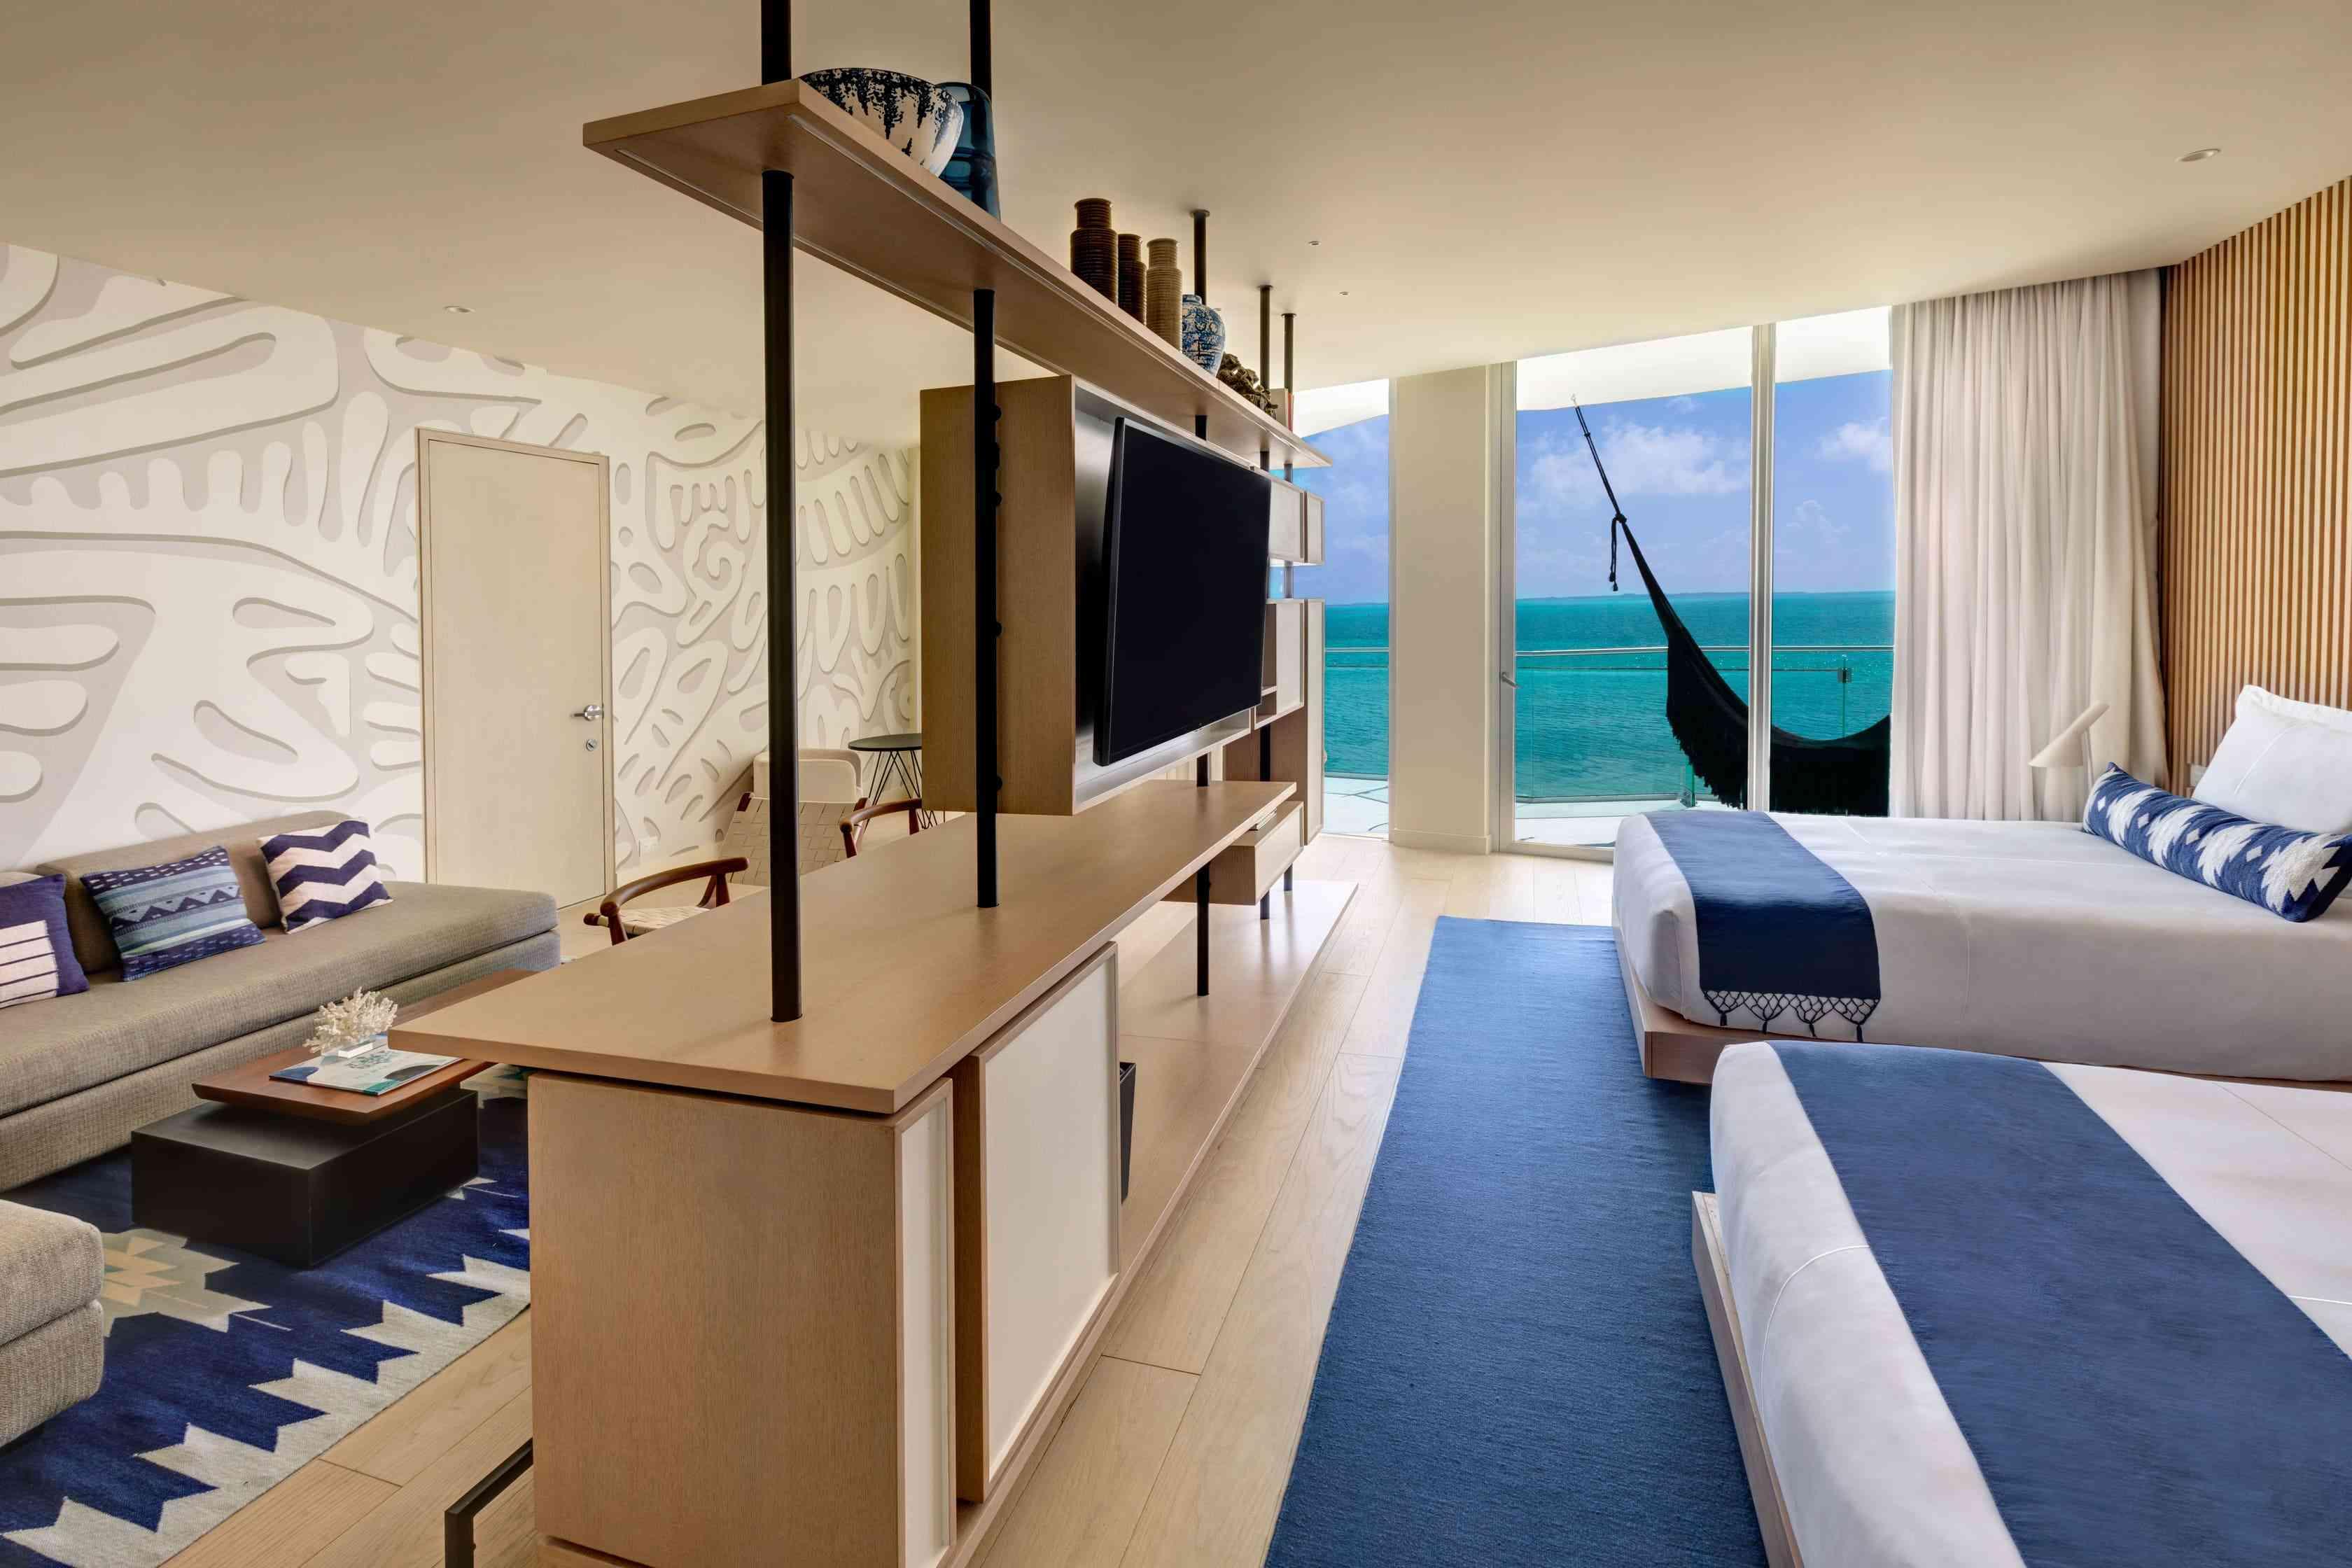 Shot of the Deluxe Ocean Front One Bedroom Suite which includes two double beds, a television, a desks that separates the bedroom from the living room, and a balcony with a hammock overlooking the ocean